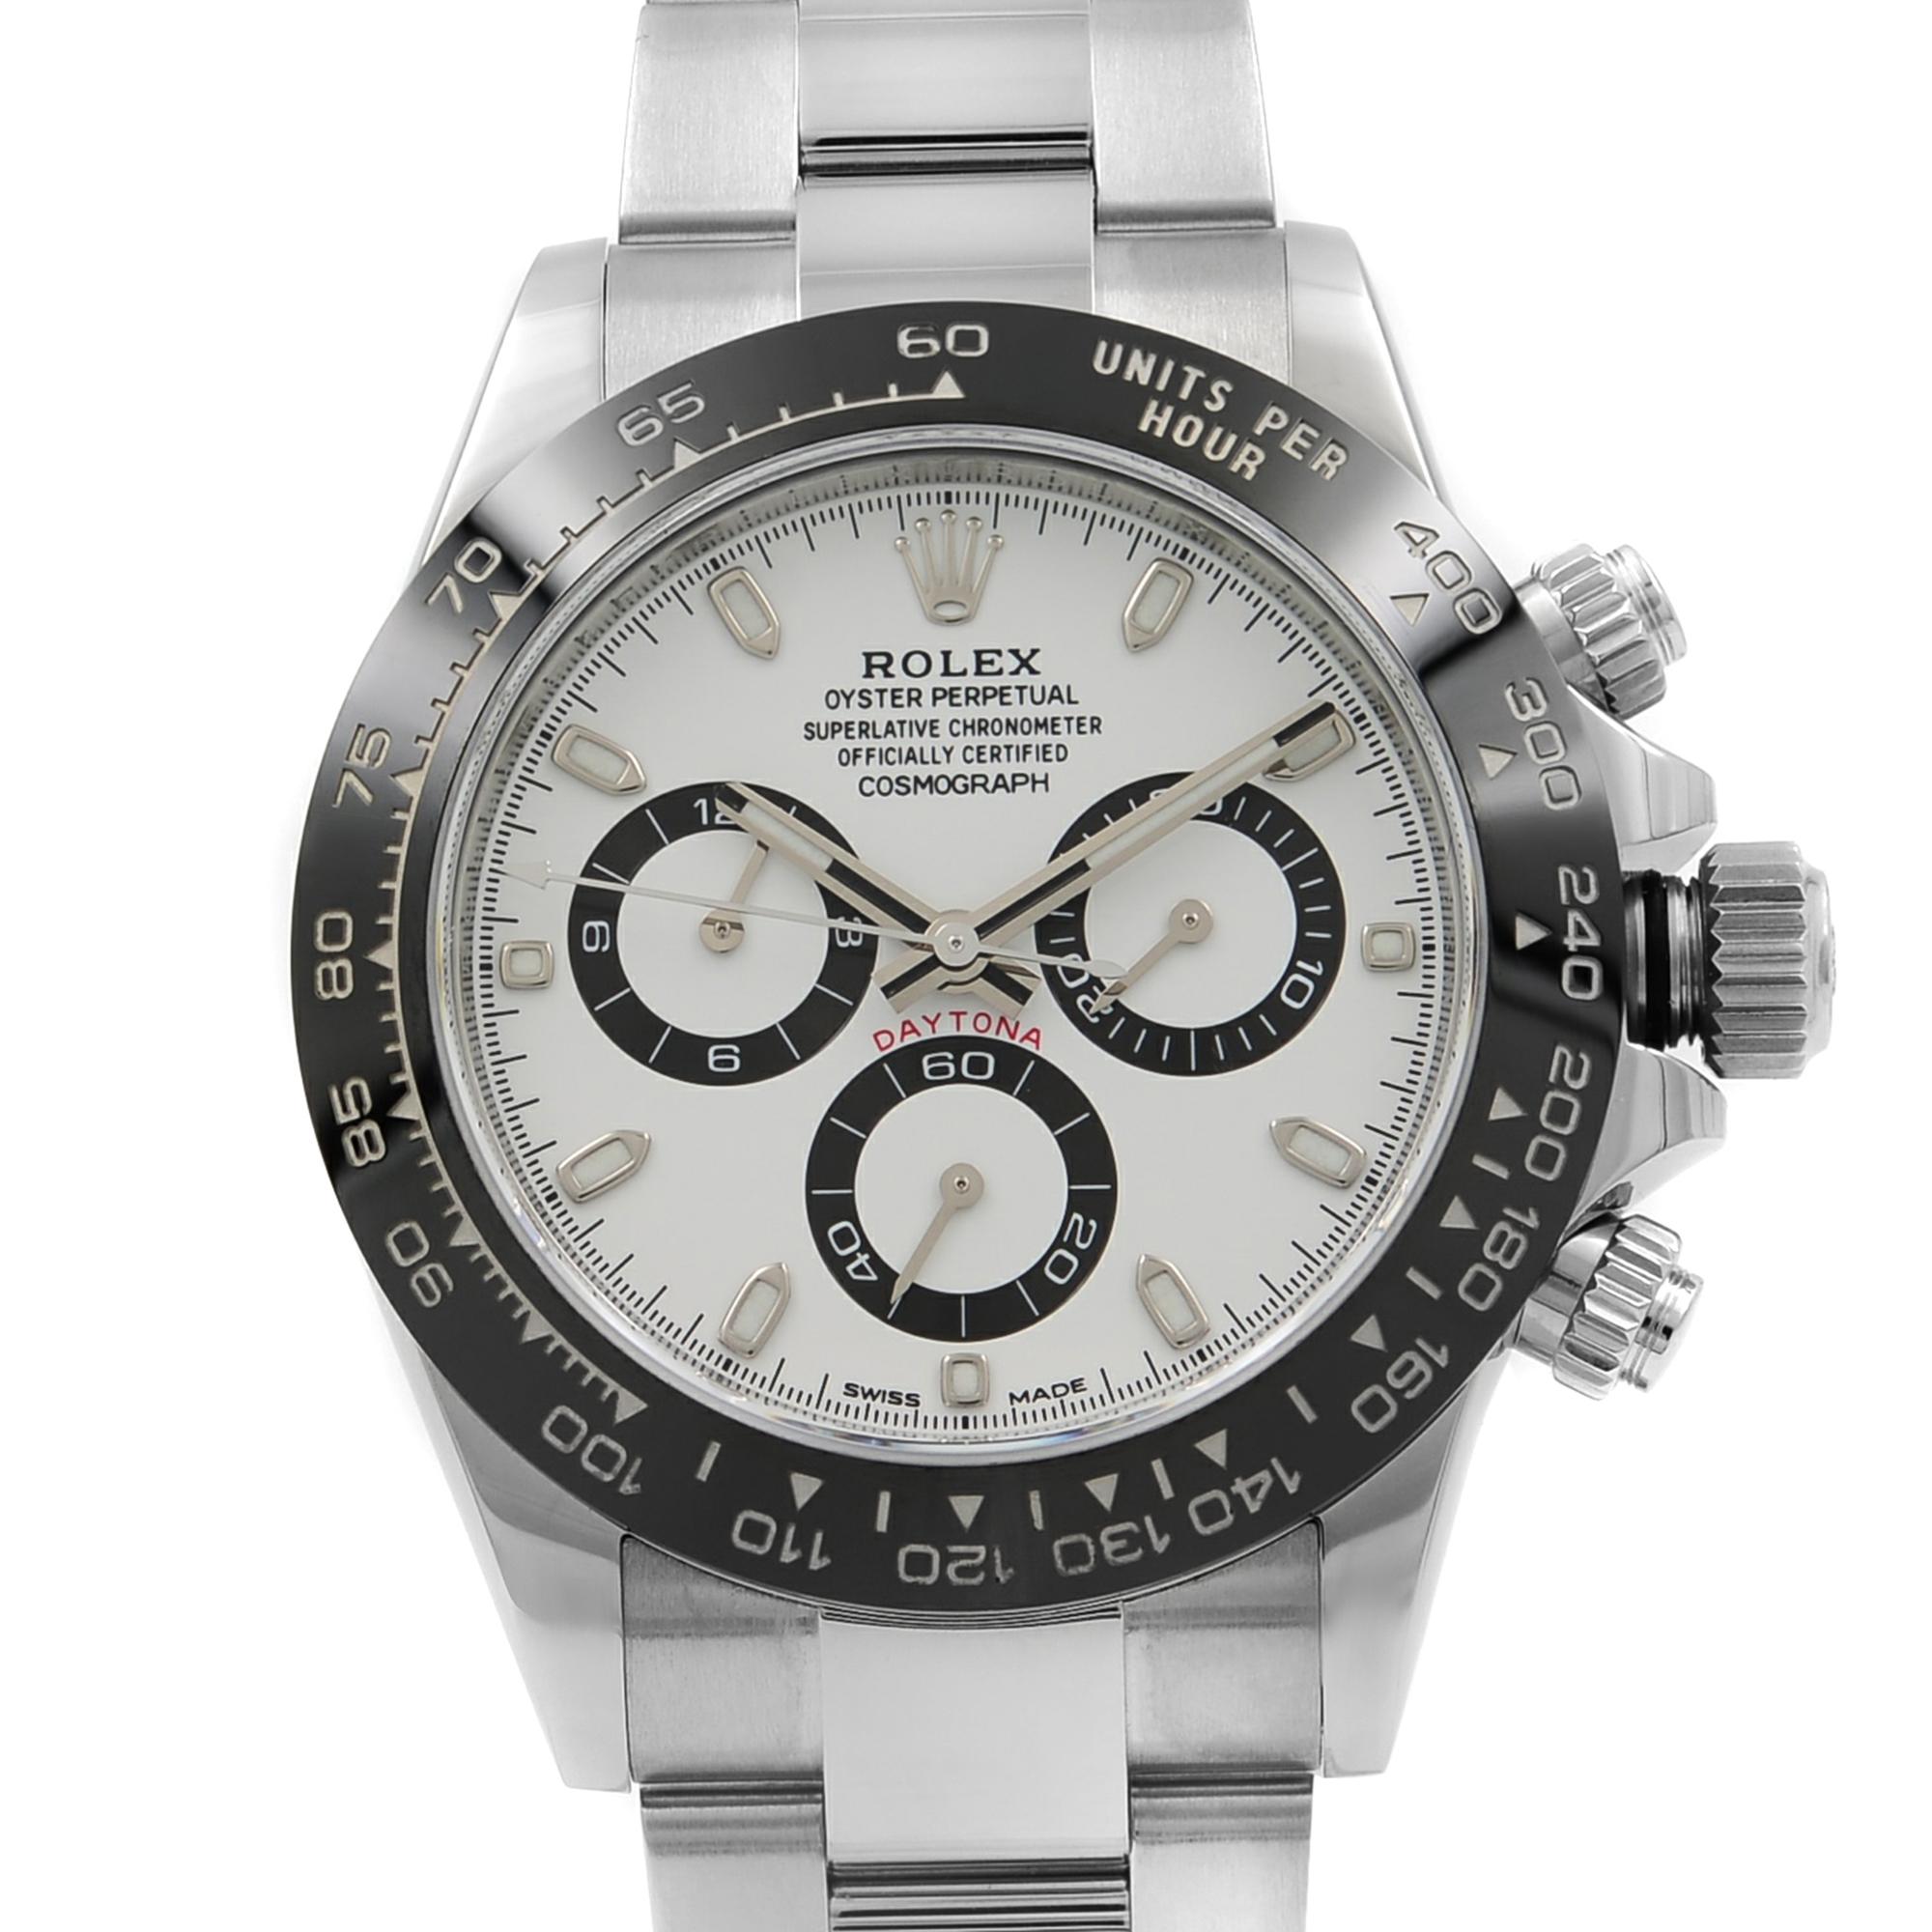 This pre-owned Rolex Daytona  116500LN w is a beautiful men's timepiece that is powered by an automatic movement which is cased in a stainless steel case. It has a round shape face, chronograph, small seconds subdial, tachymeter dial and has hand